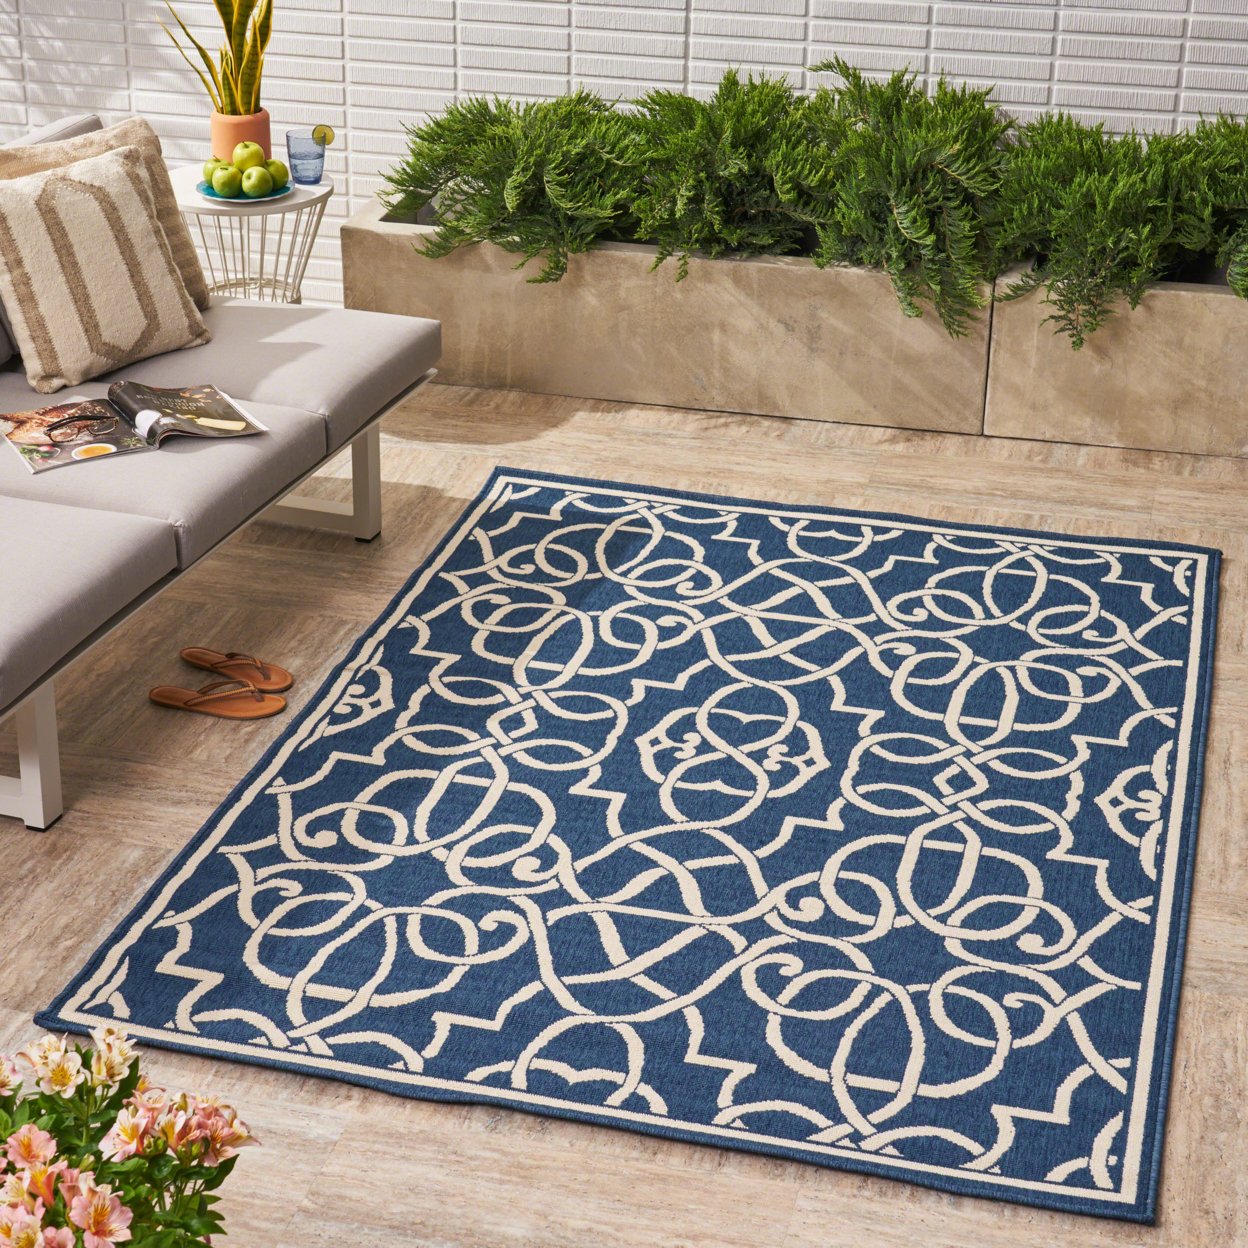 Alfonso Outdoor Geometric Area Rug - 8'x11', Navy/Ivory